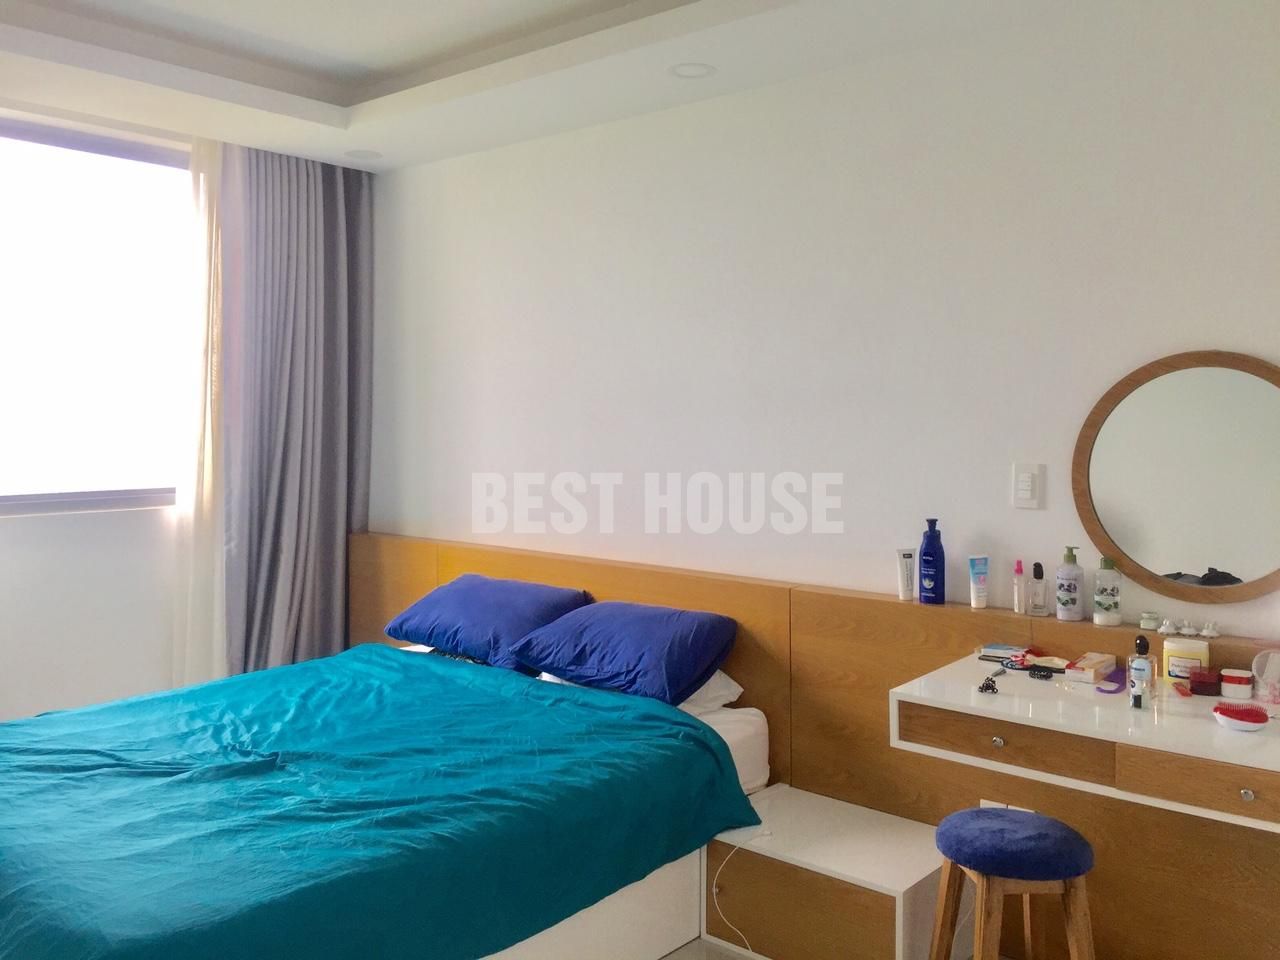 green-valley-apartment-for-rent-in-phu-my-hung